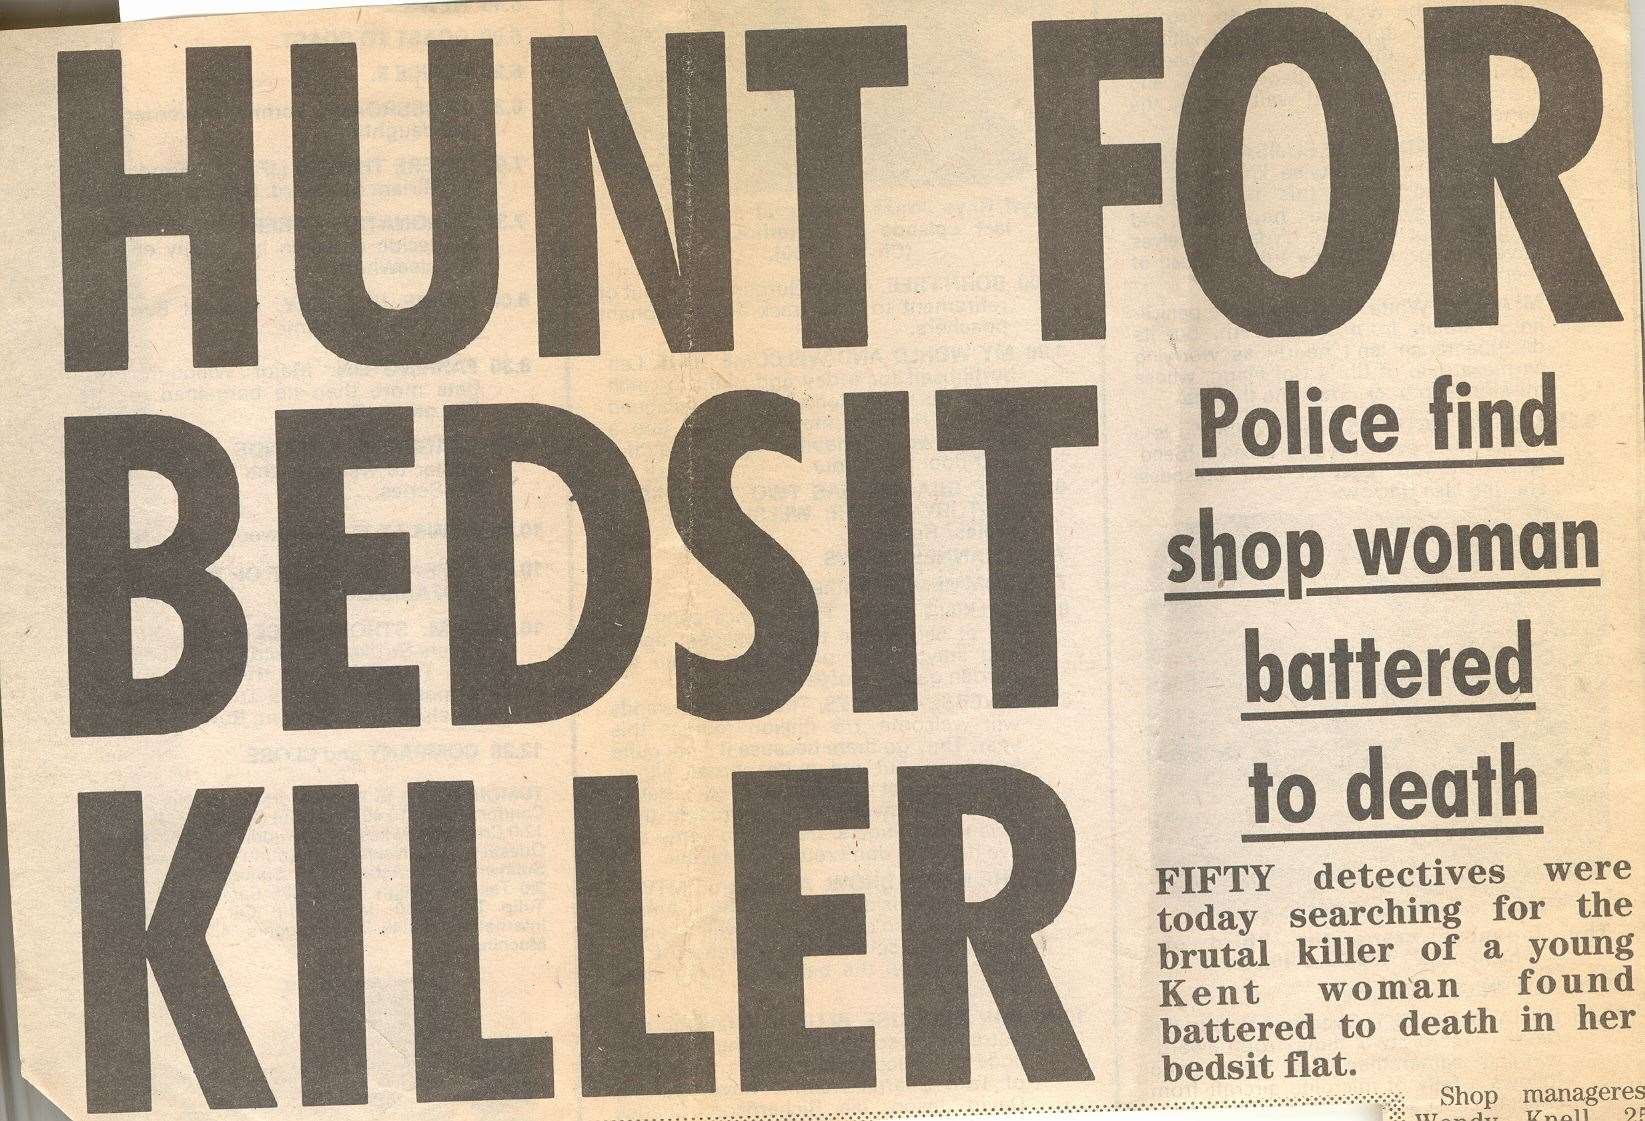 Wendy Knell and Caroline Pierce deaths in 1987 in the Evening Post